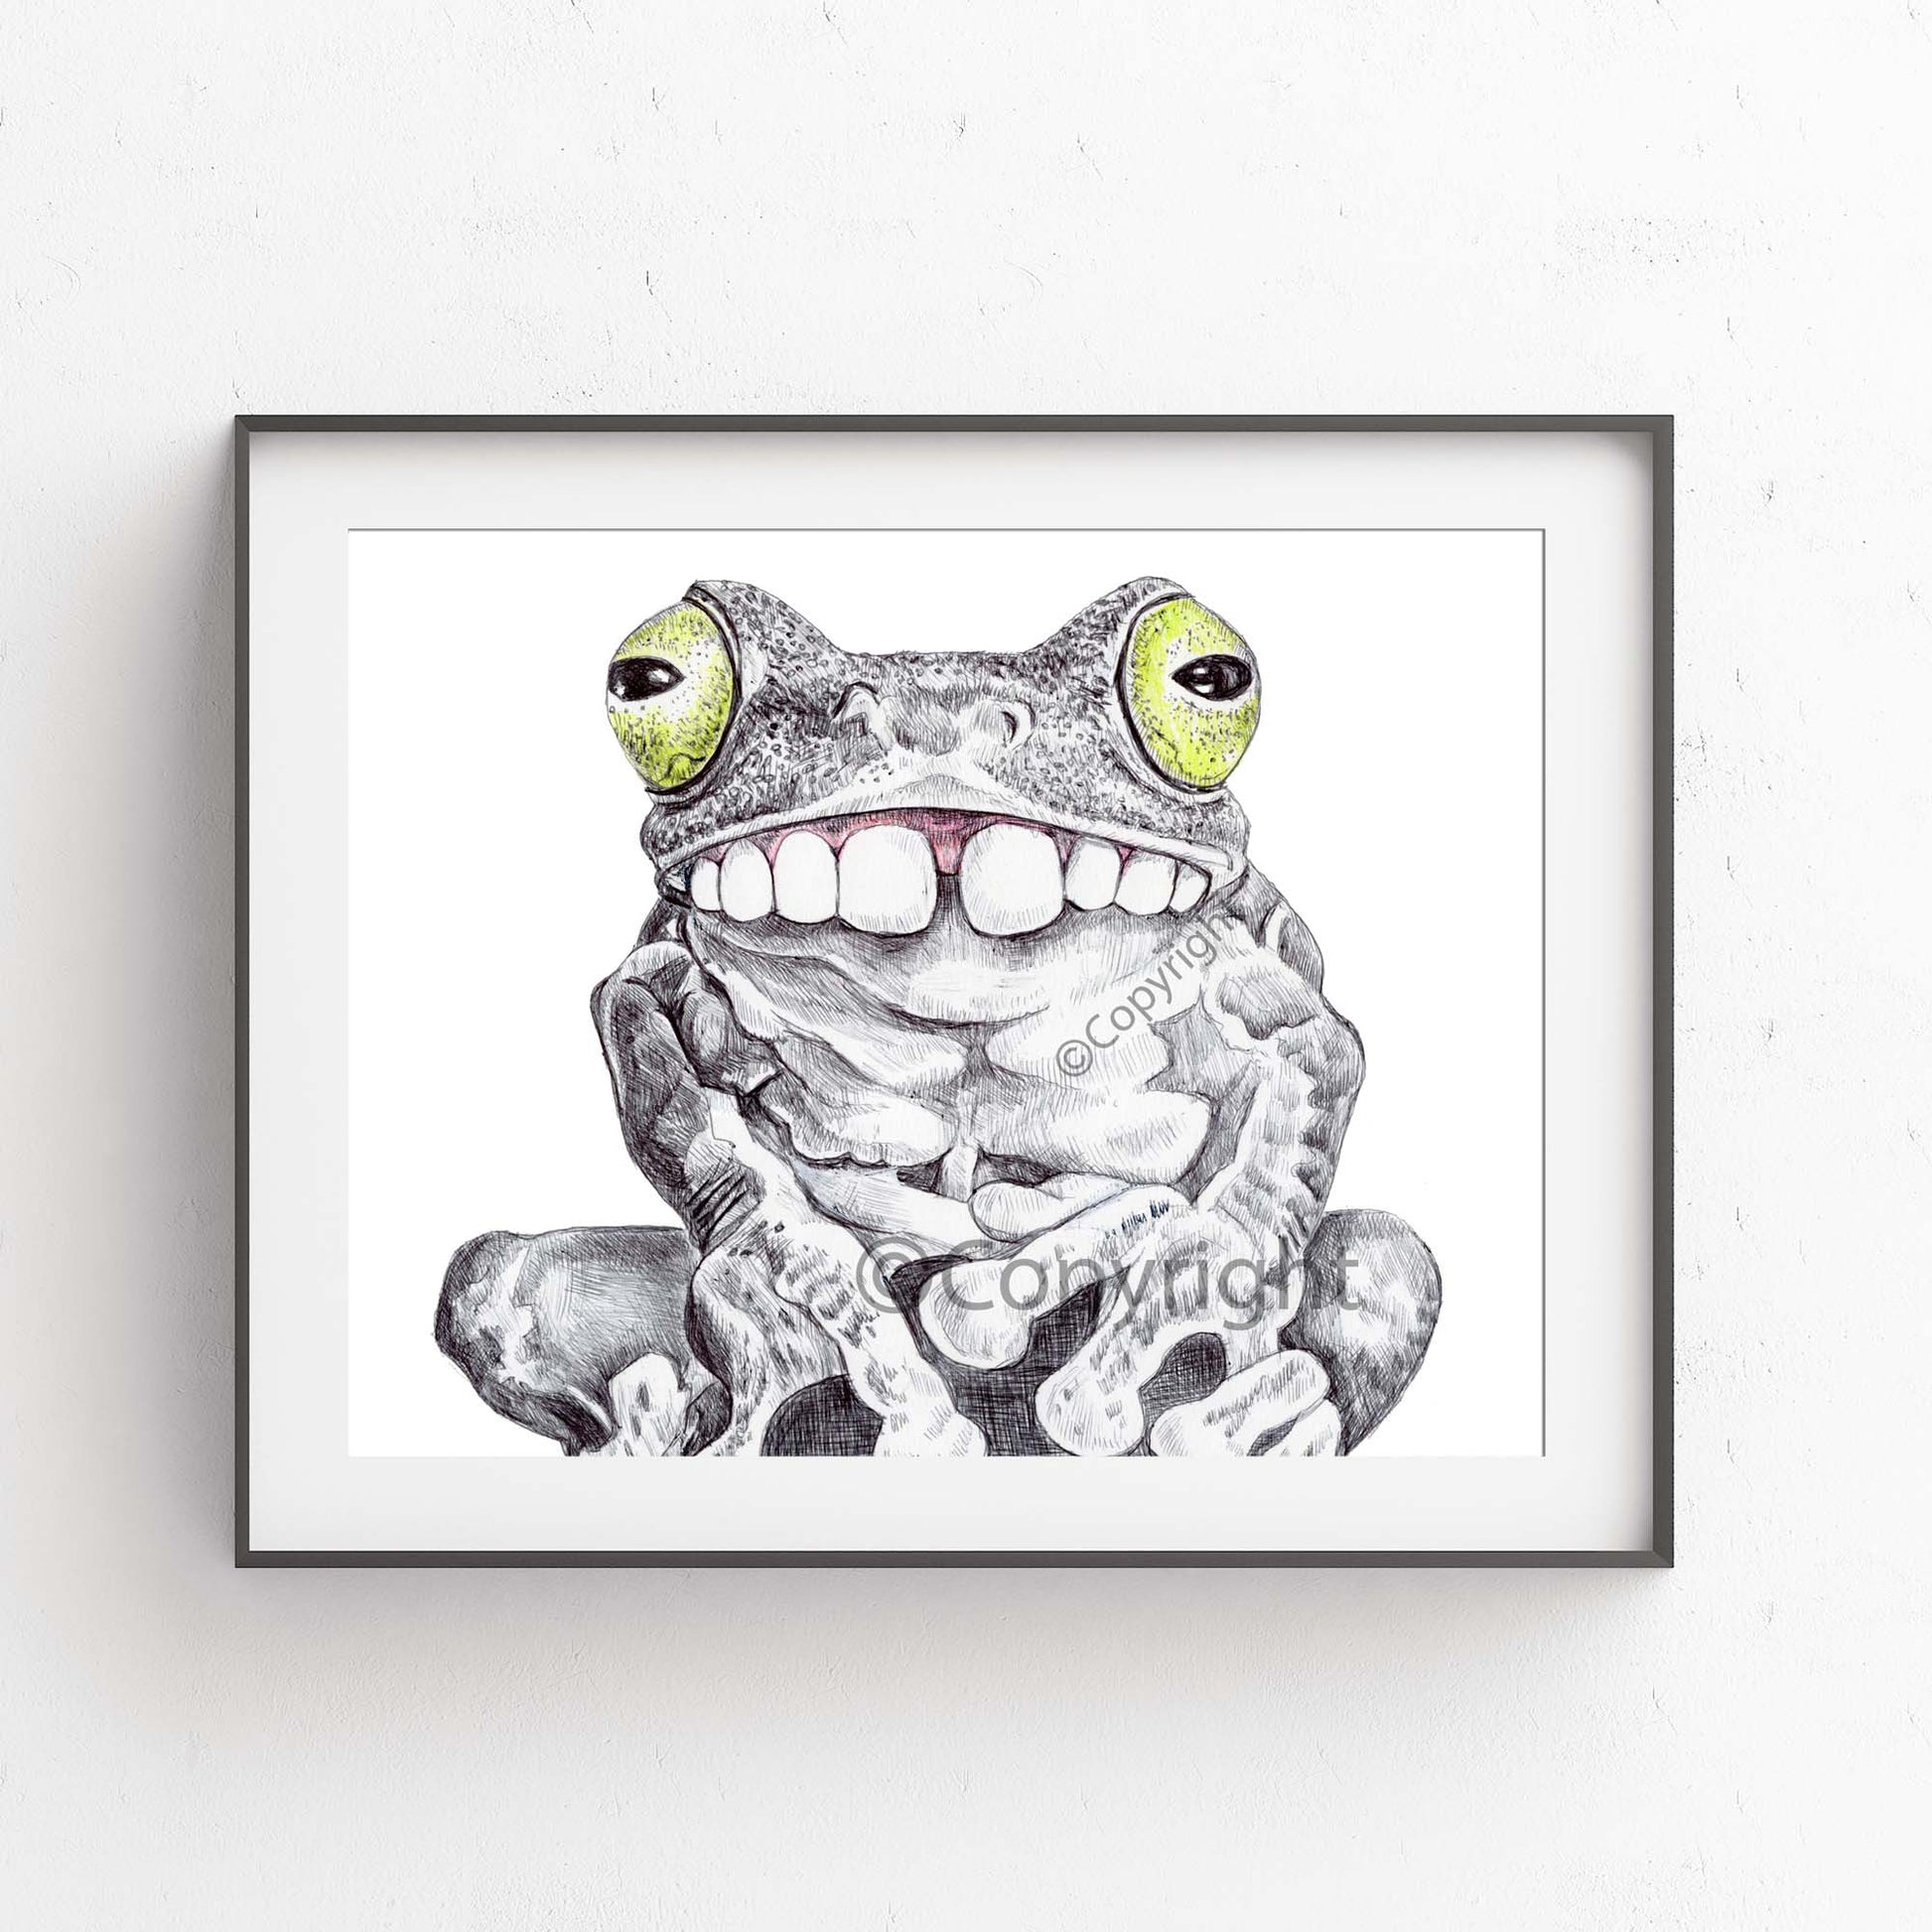 Ballpoint pen drawing of a tree frog with a big gap tooth smile. Art by Deidre Wicks